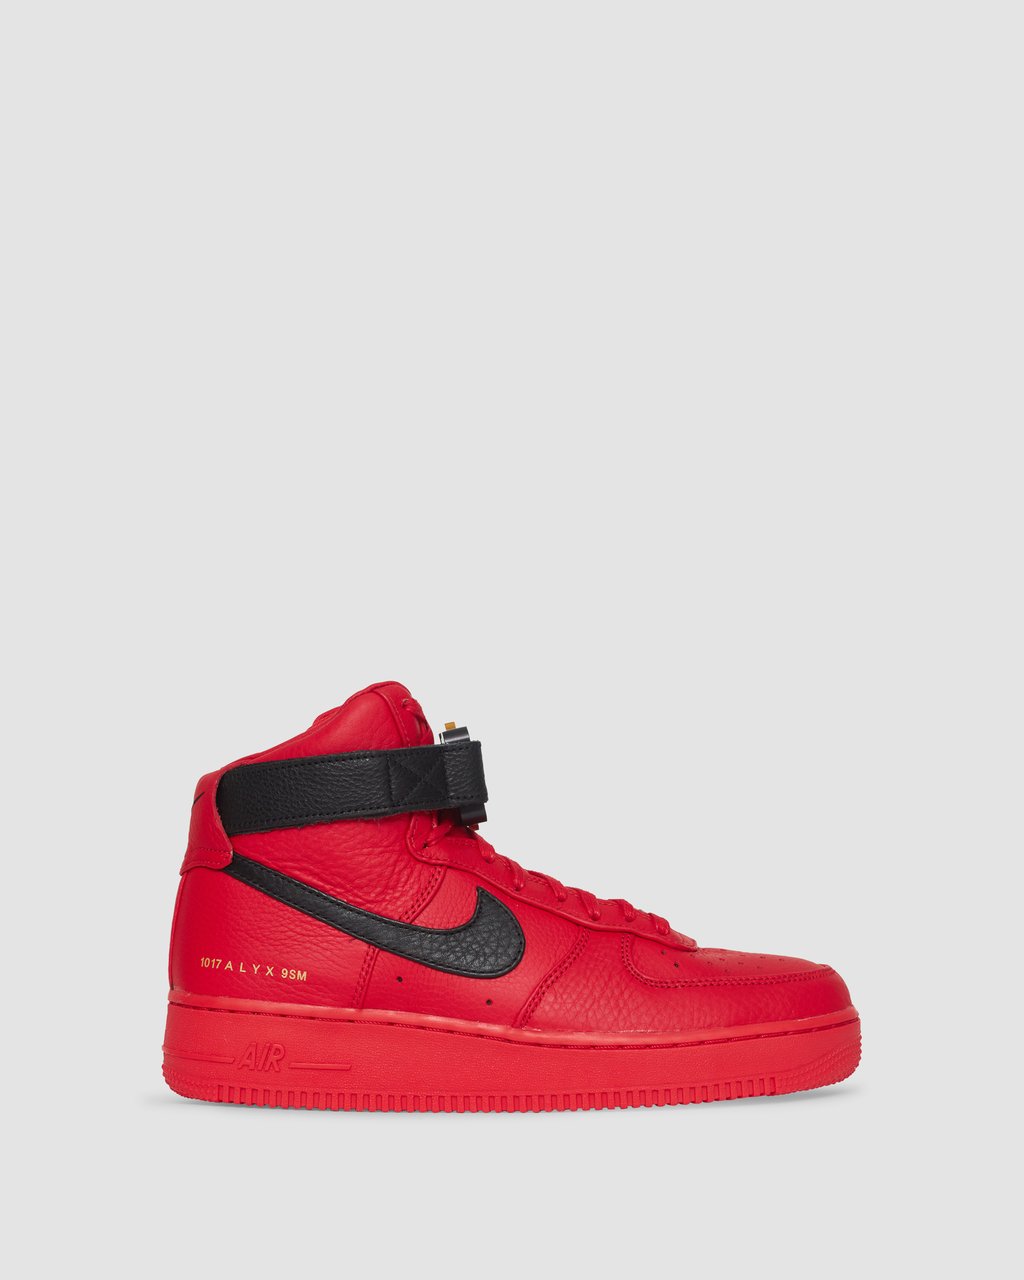 NIKE Air Force 1 x ALYX and Red | zapatillasysneakers.com